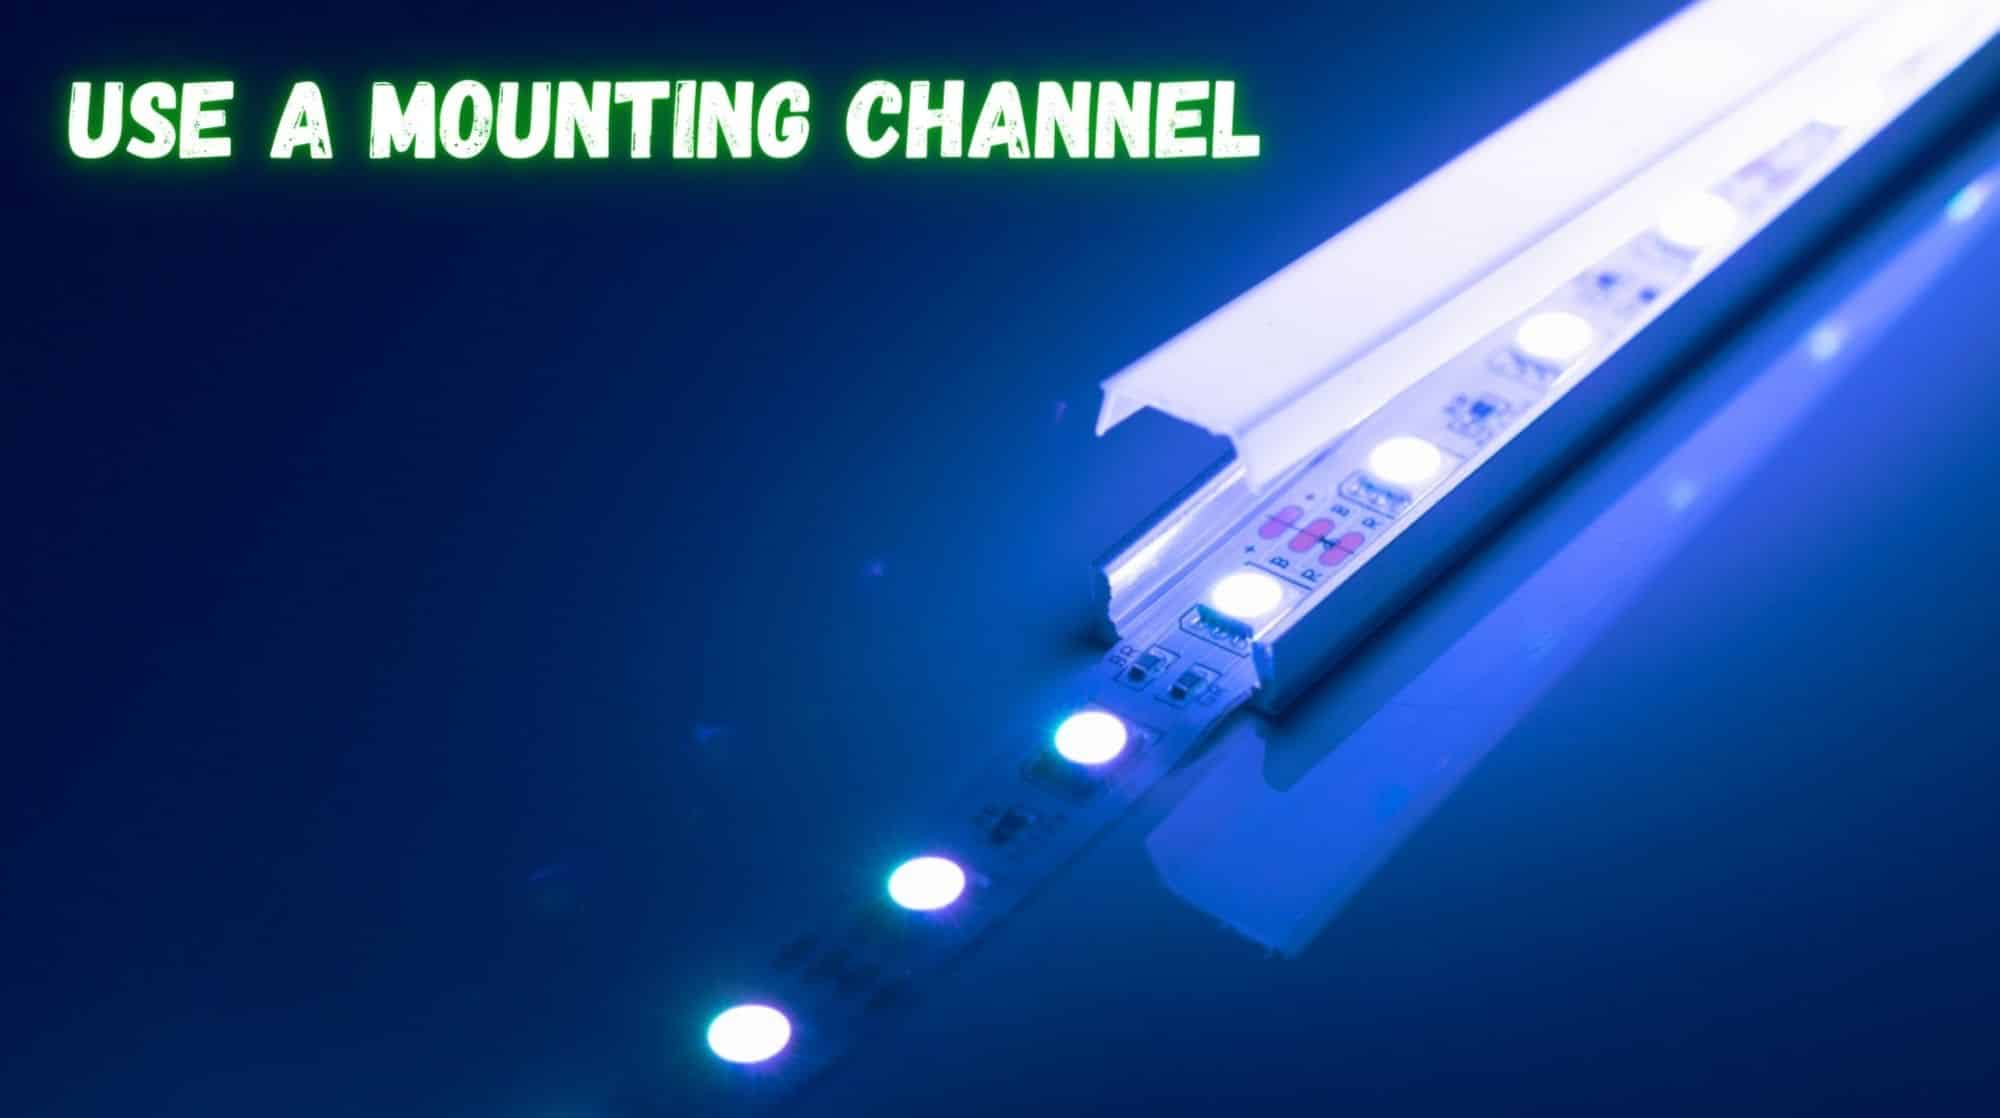 Use a Mounting Channel